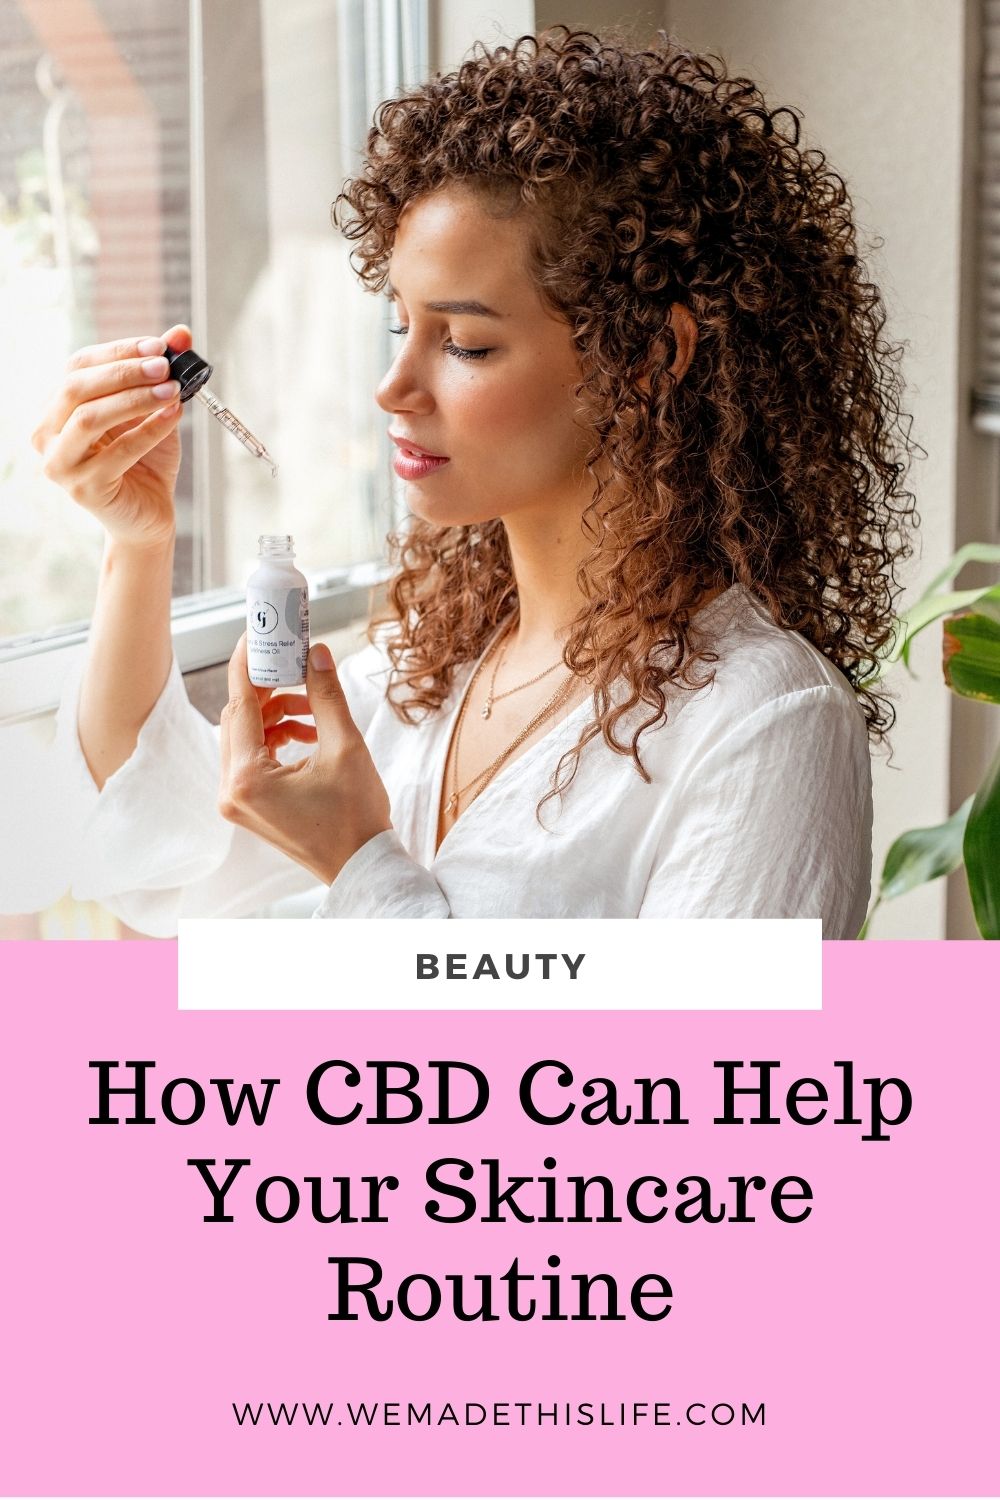 How CBD Can Help Your Skincare Routine